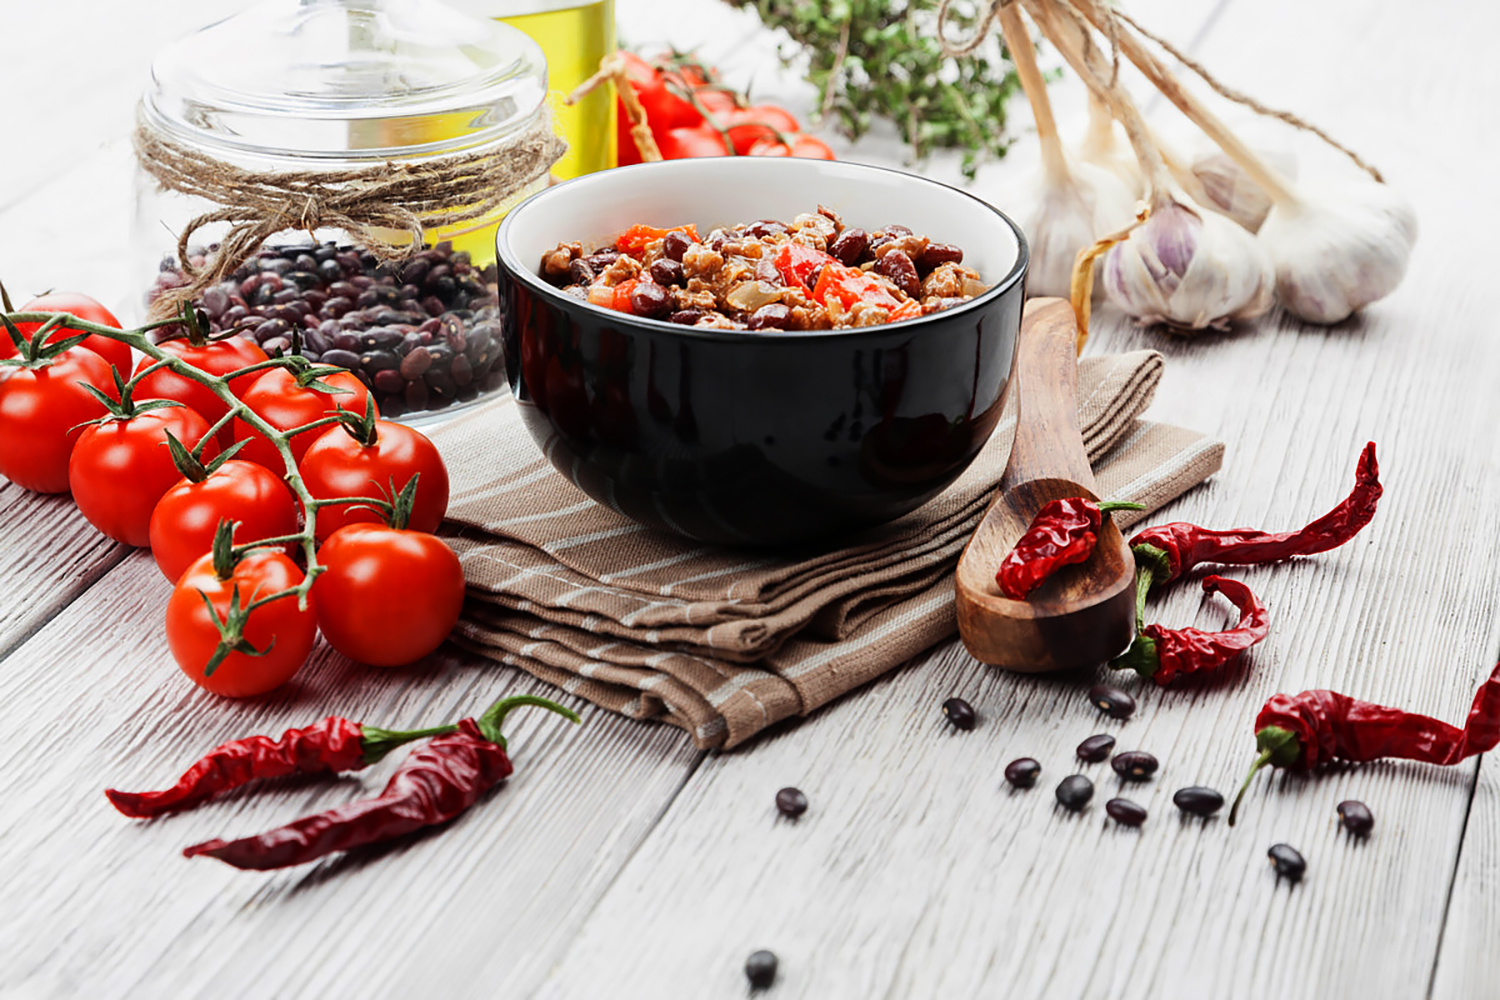 tomatoes, beans, garlic, chili peppers, olive oil on a slatted table top from a stocked pantry